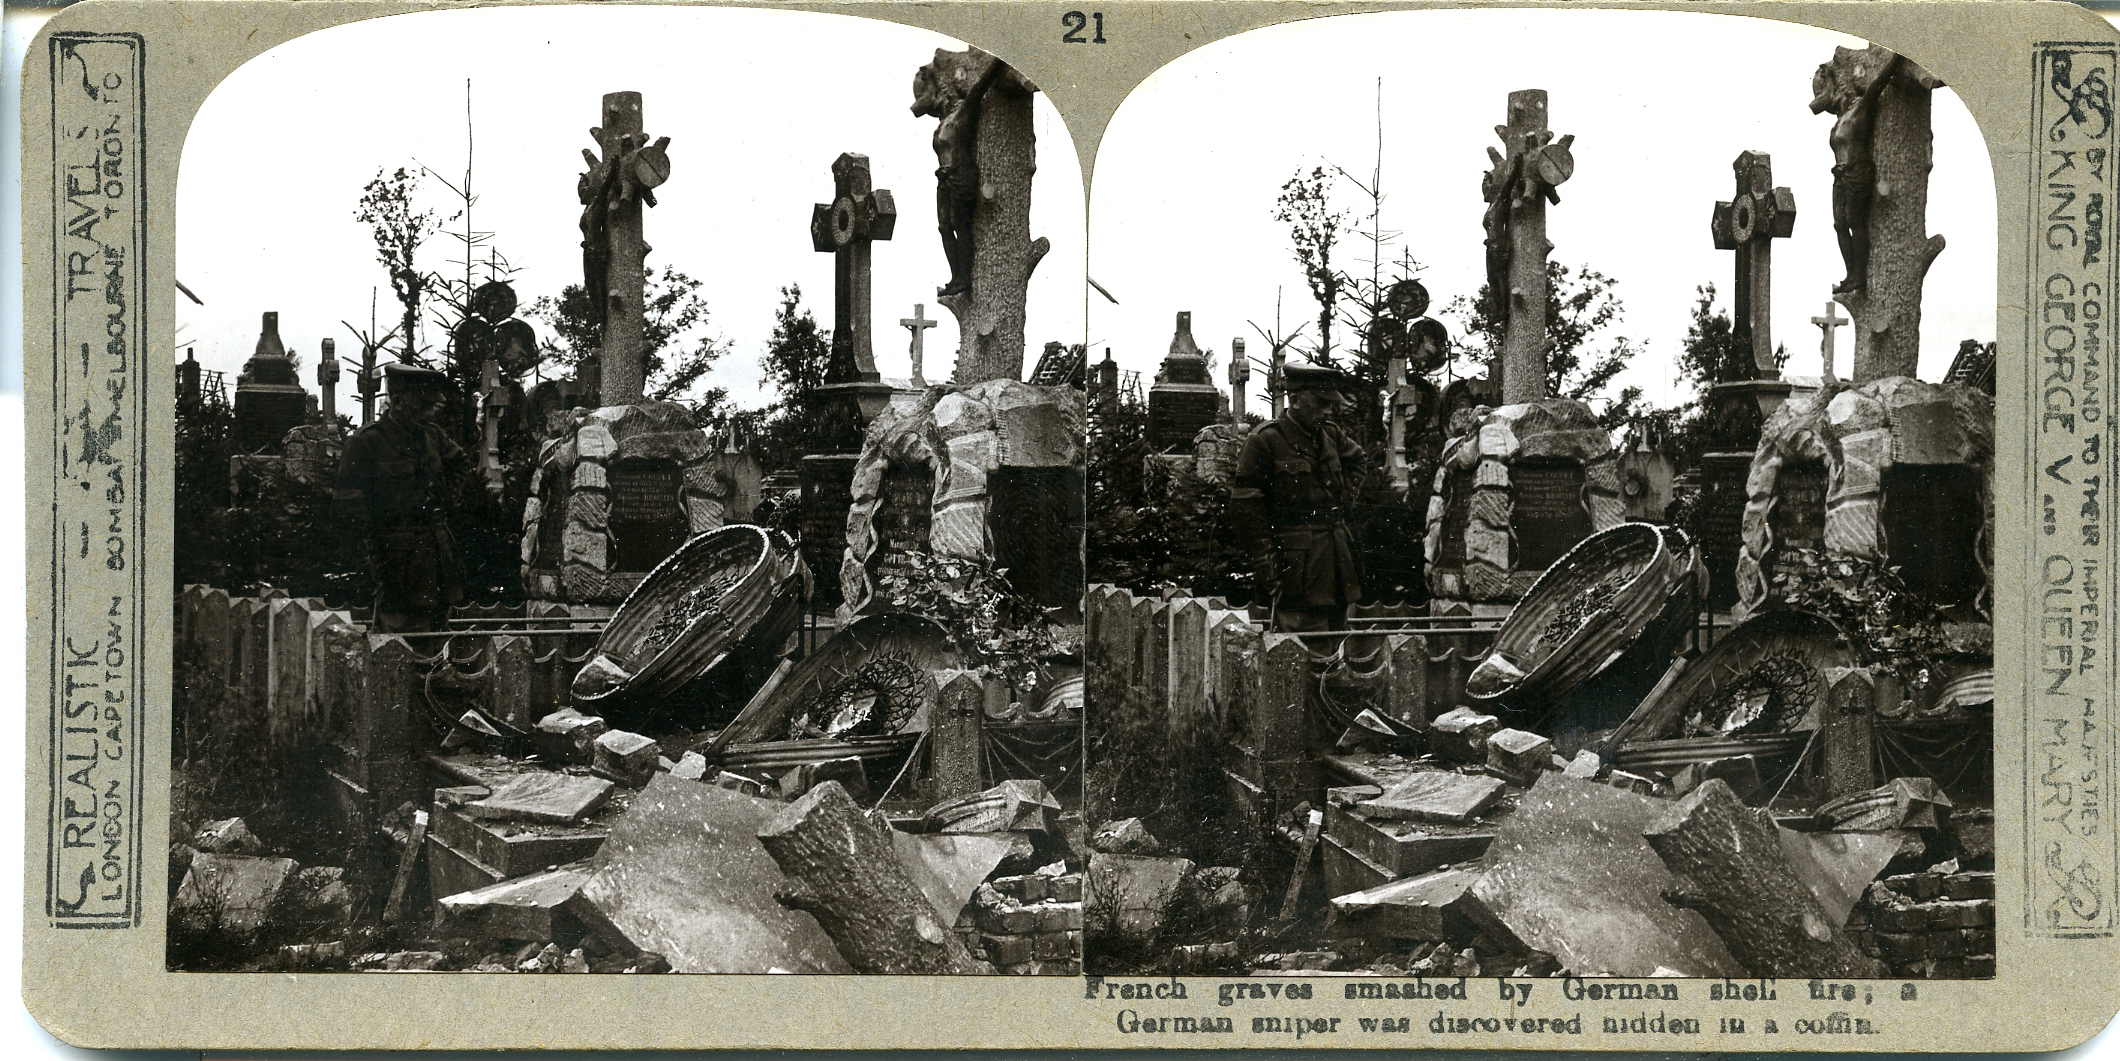 French graves smashed by shell fire, where a Hun sniper was discovered hiding in a coffin